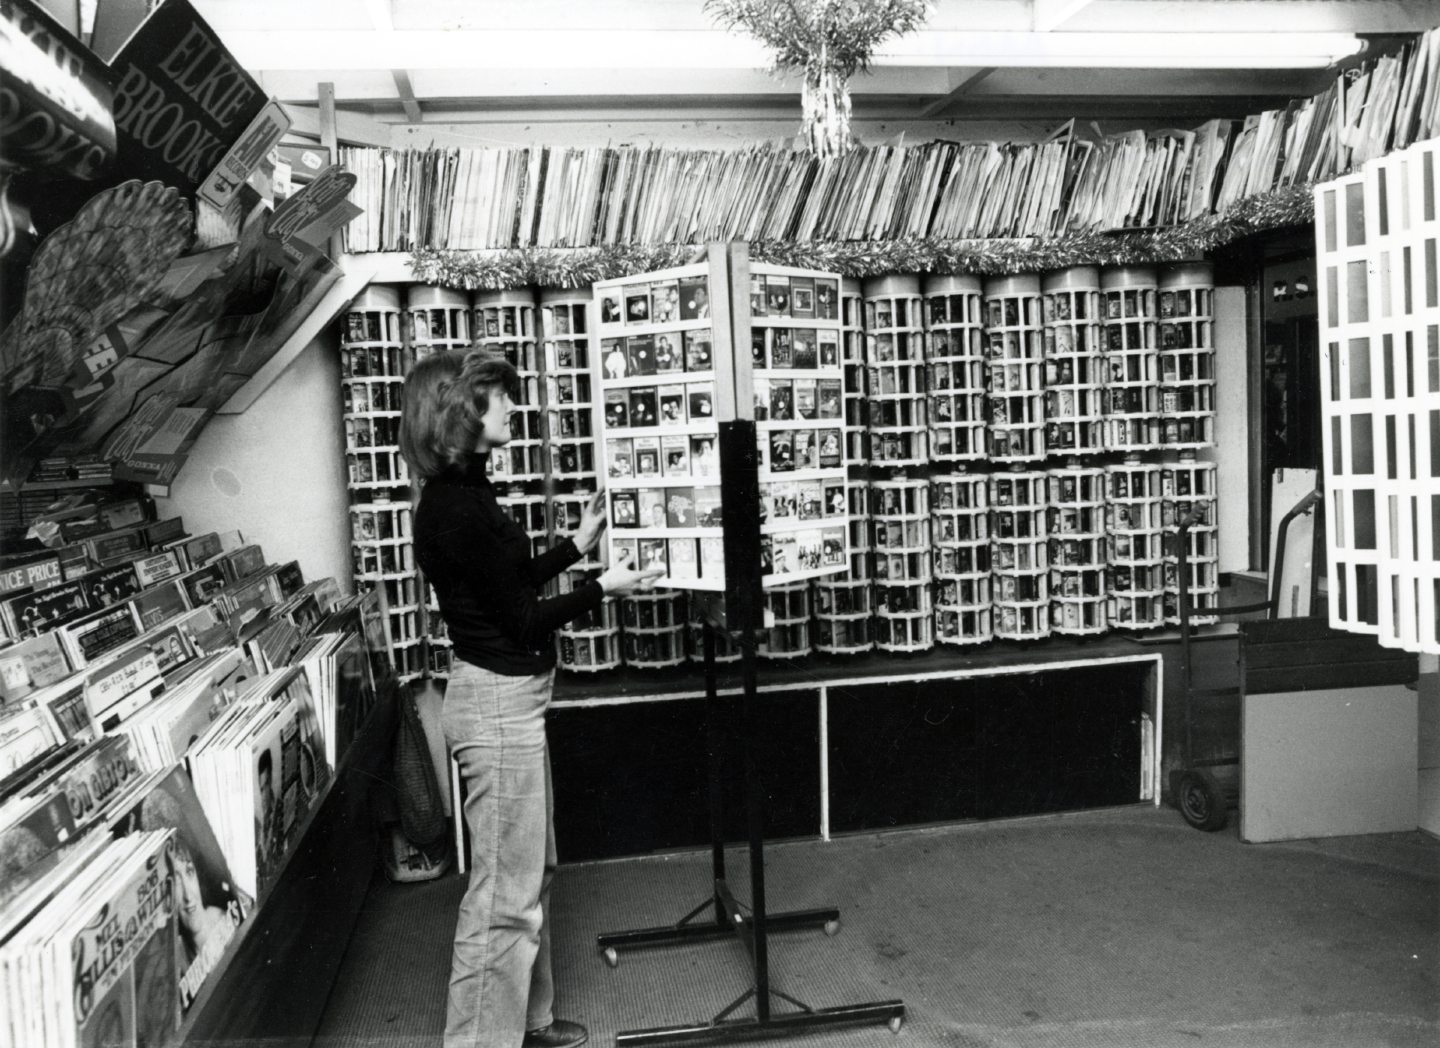 Newmarket Tapes was the place to go for all the latest releases in the 1970s and 1980s.